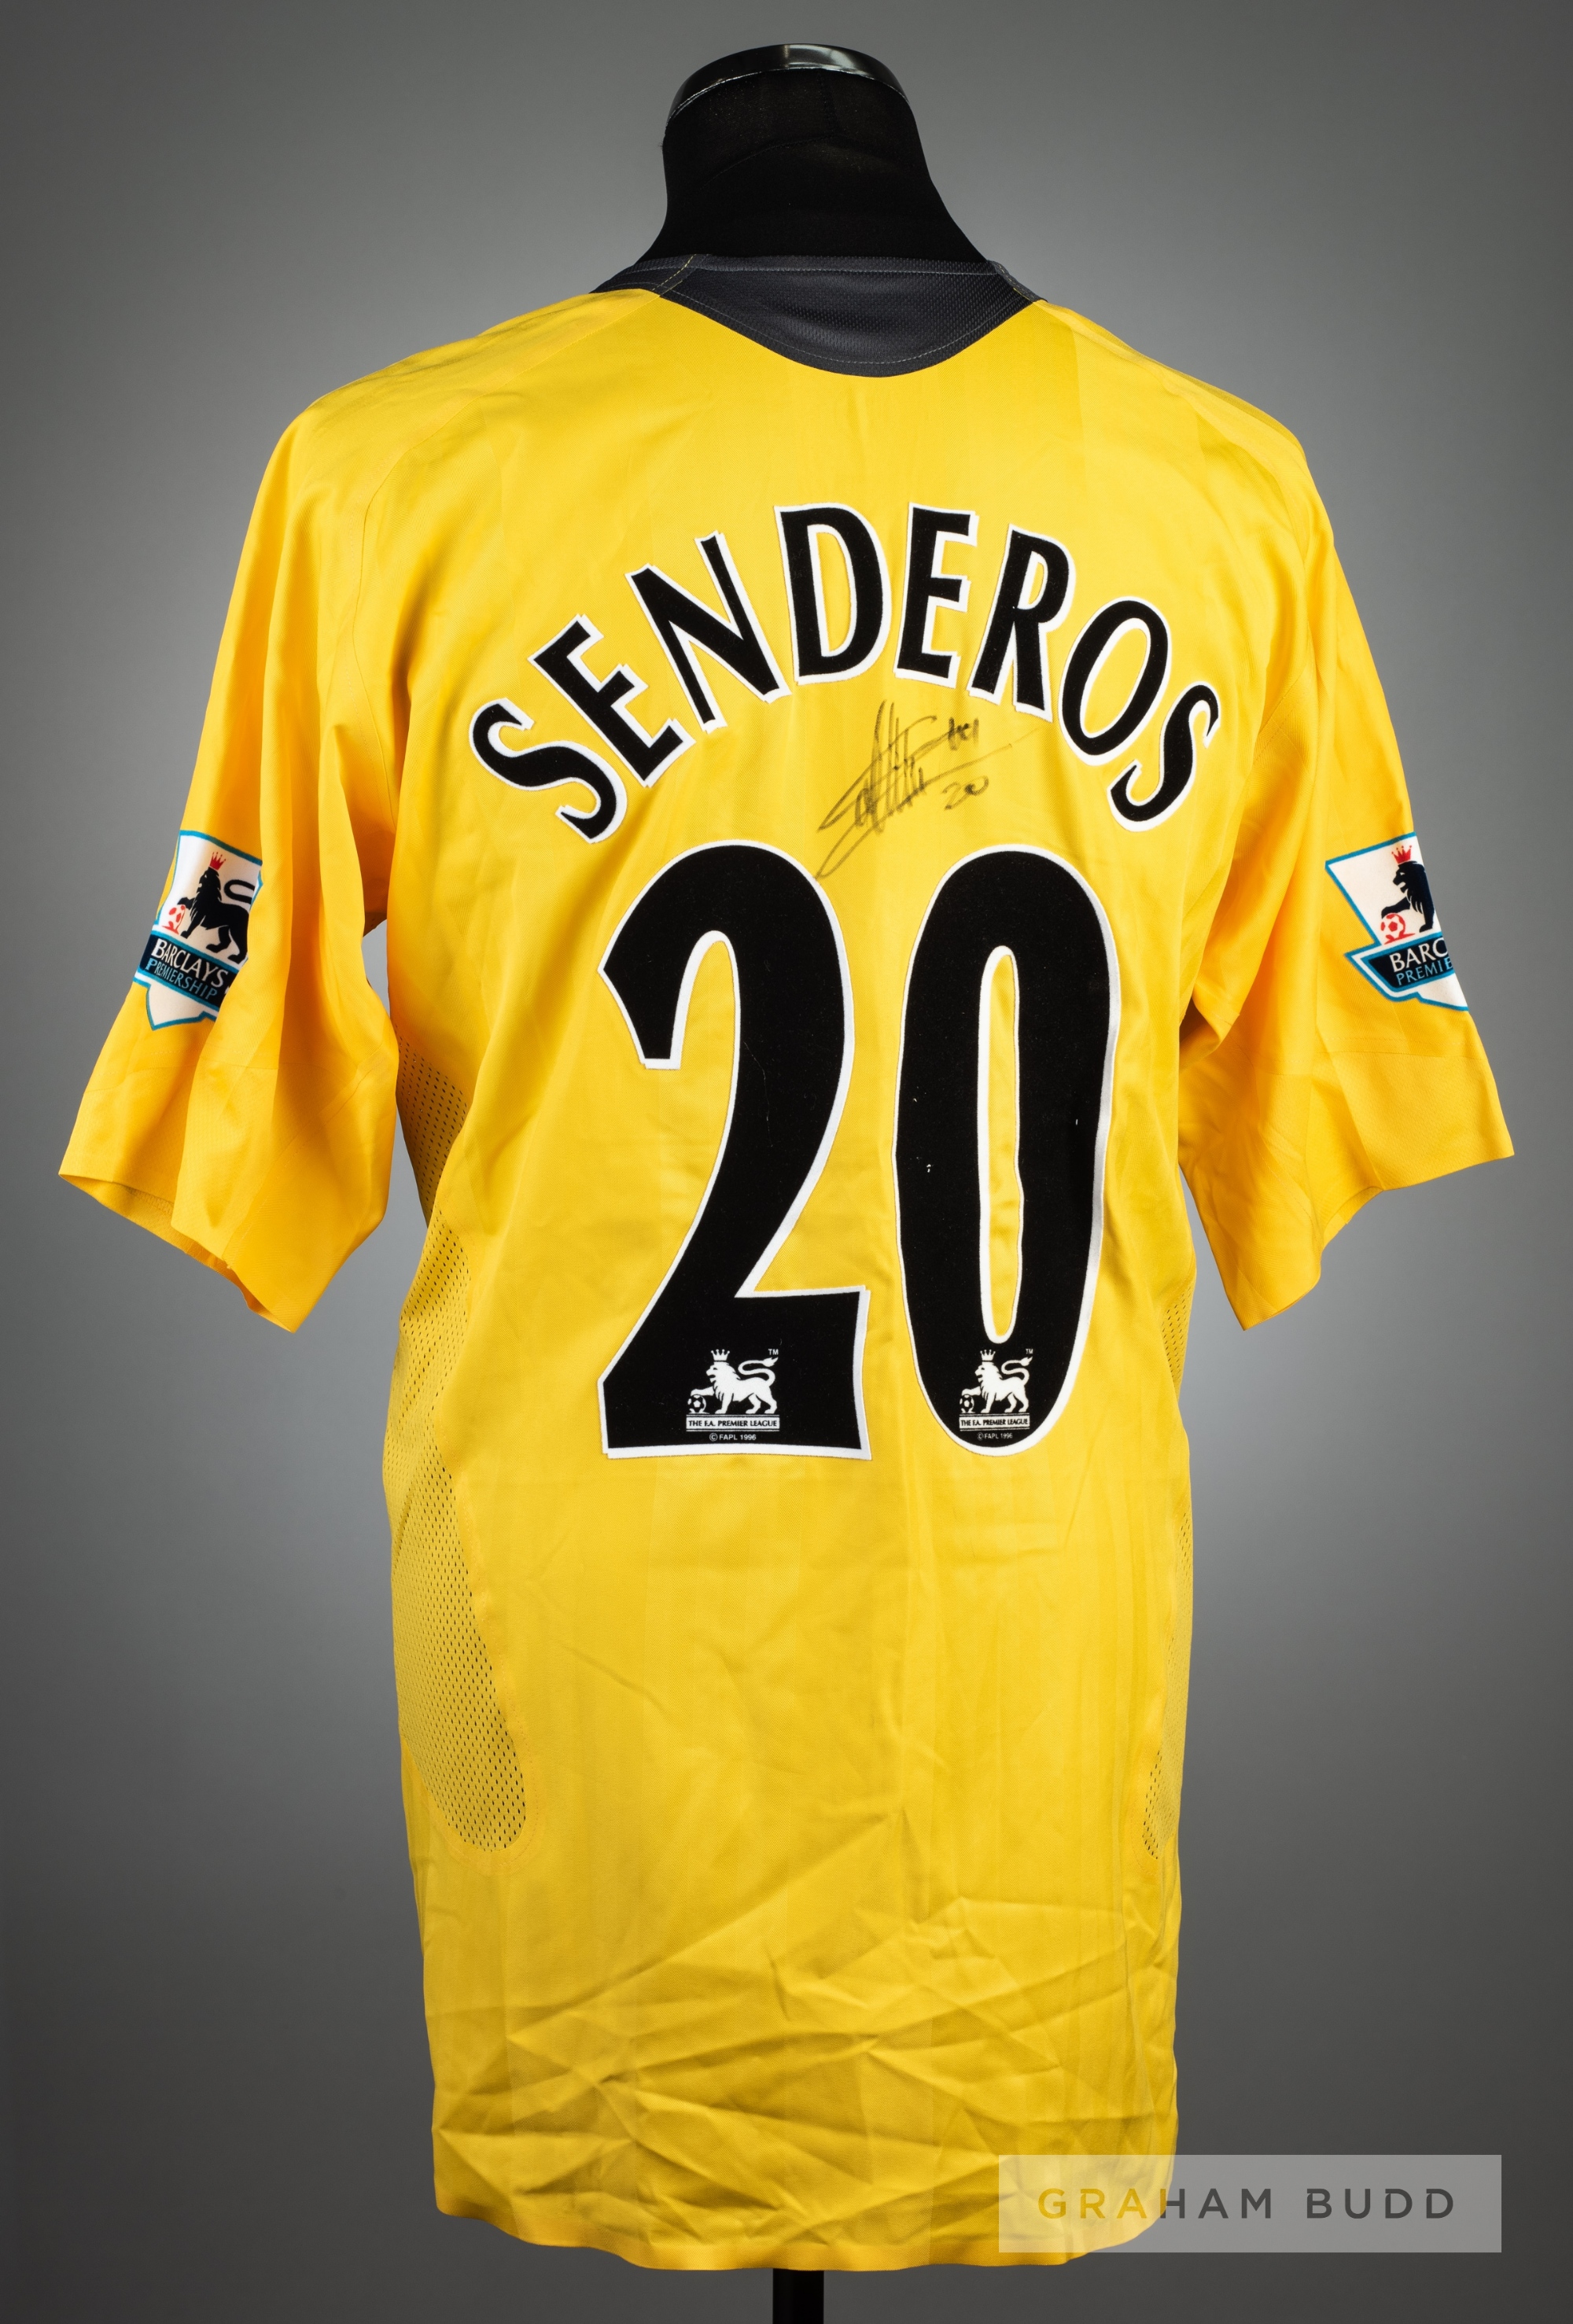 Philippe Senderos signed yellow Arsenal No.20 away jersey, season 2005-06, short-sleeved, with - Image 2 of 2